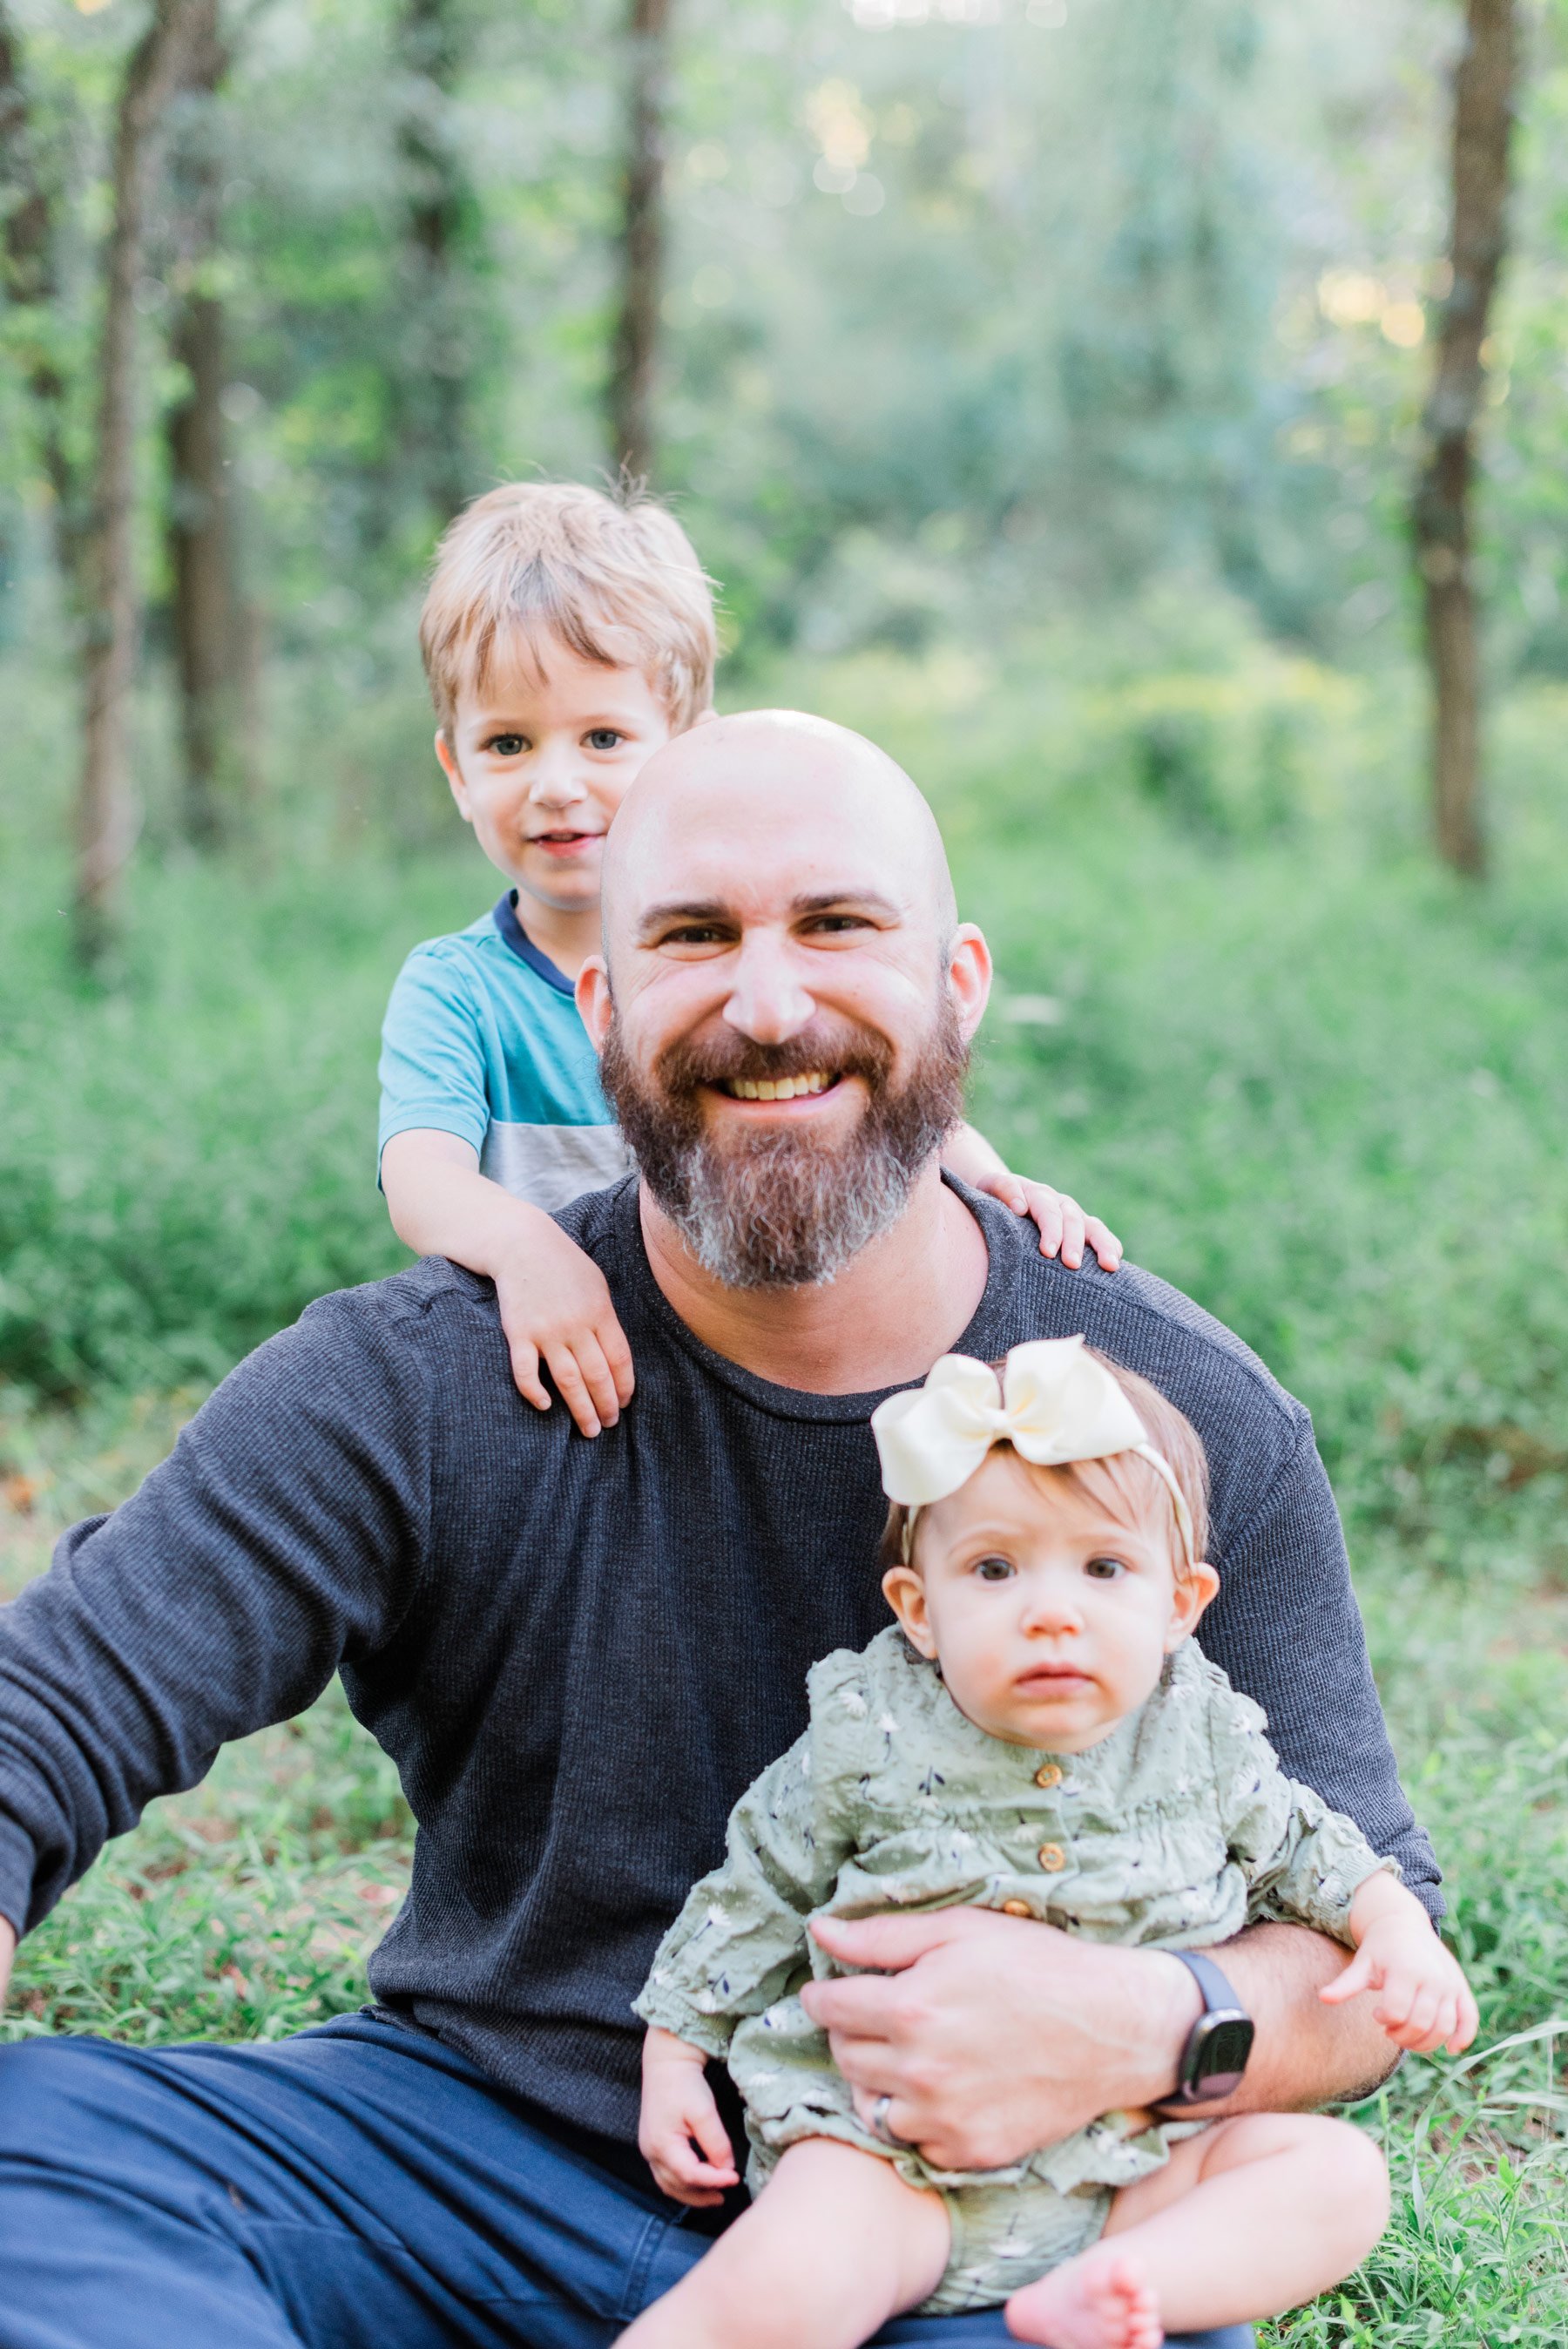    A daddy and his young son and daughter smile for the camera during an outdoor Georgia family photo session.#peachtreecityphotographer #familyphotographersenoia #outdoorfamilyphotos #familyphotoswithkids #fayettevillefamilyphotographer #fallfamilyp